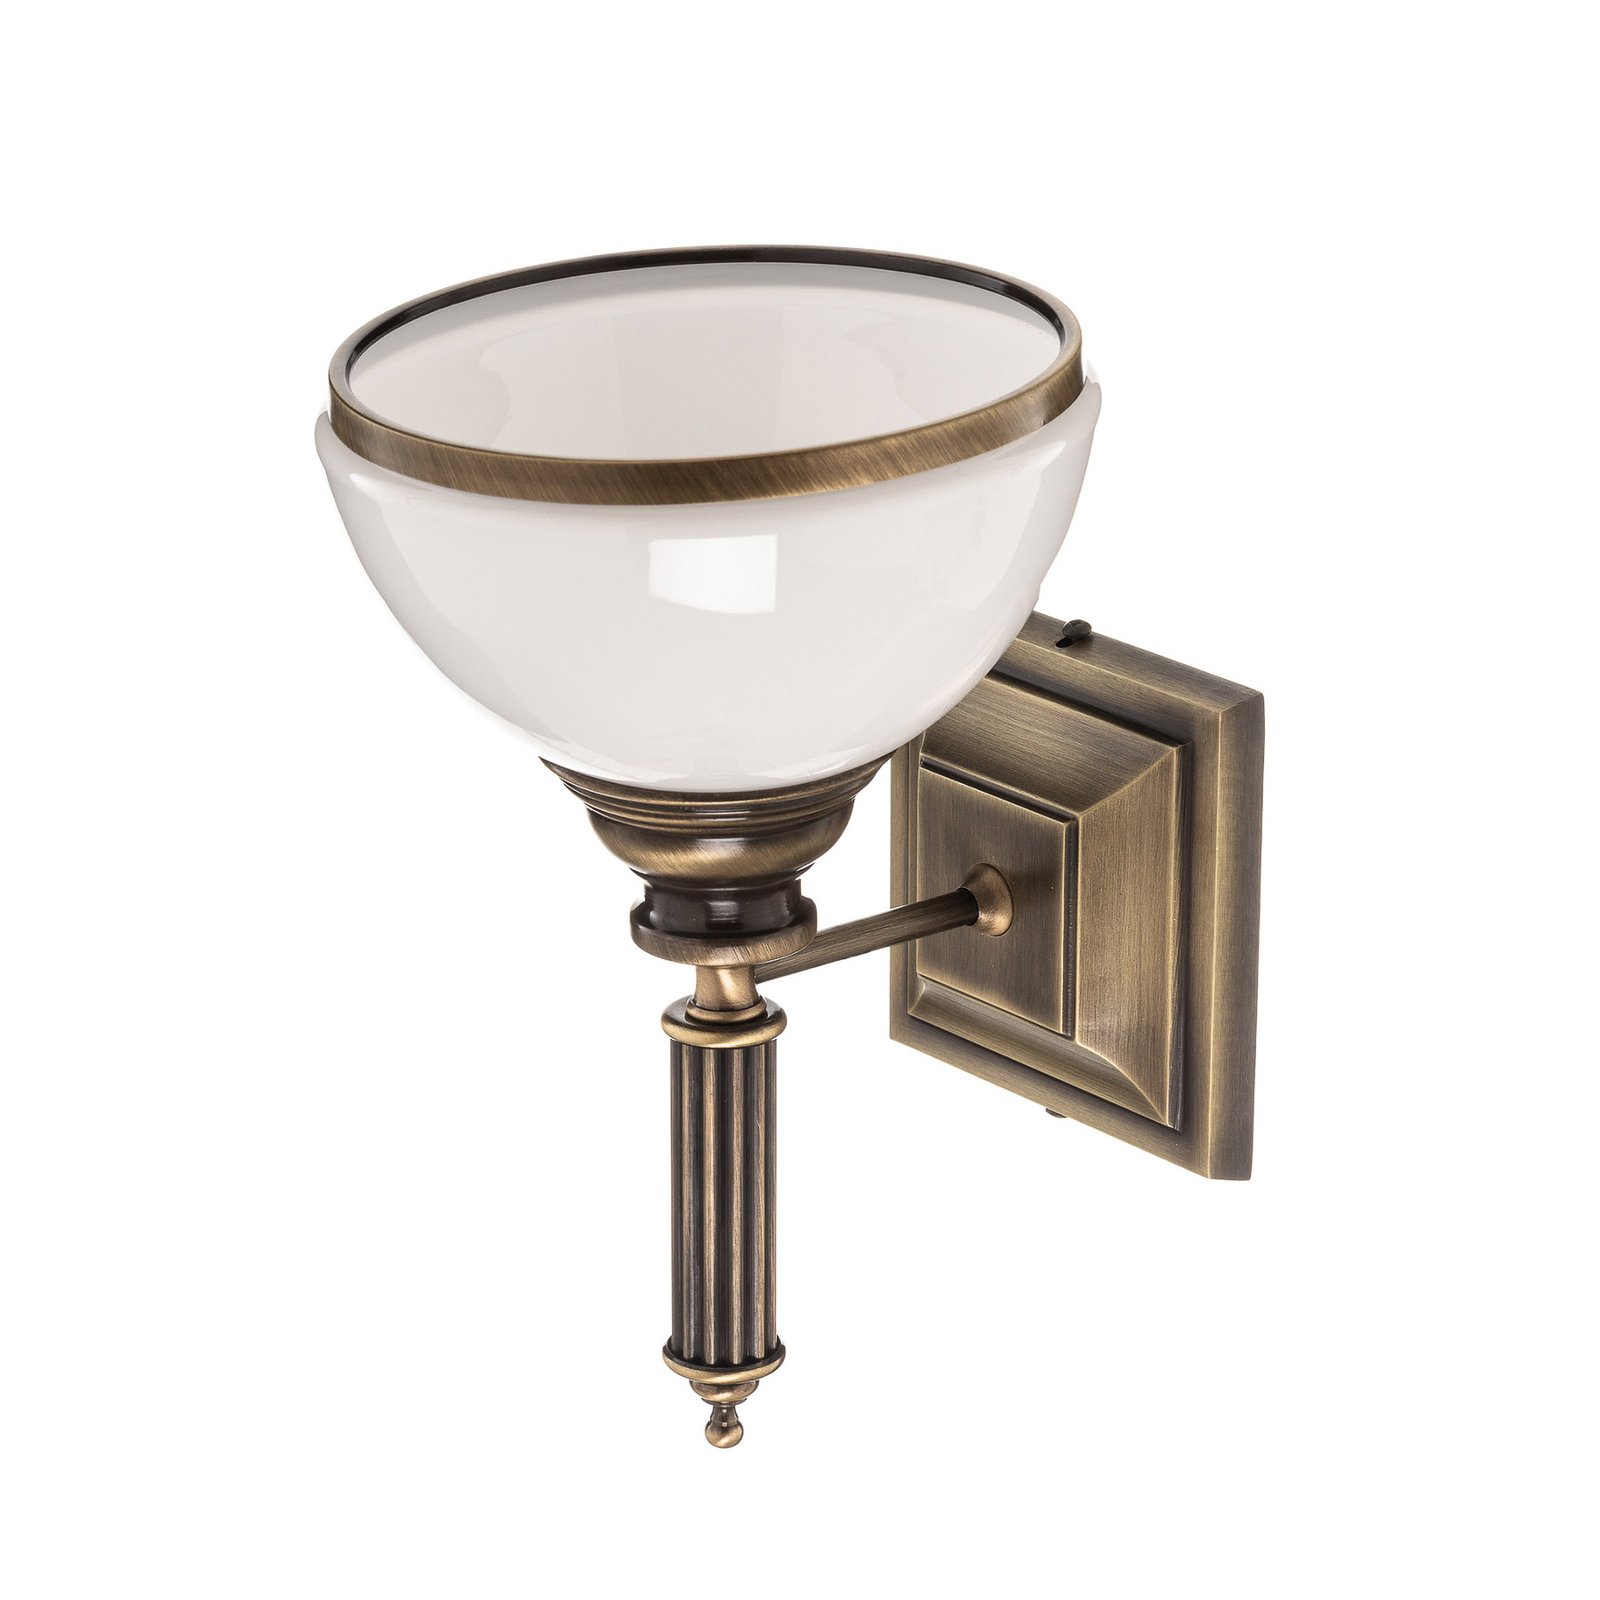 Petro wall light, antique with glass lampshade